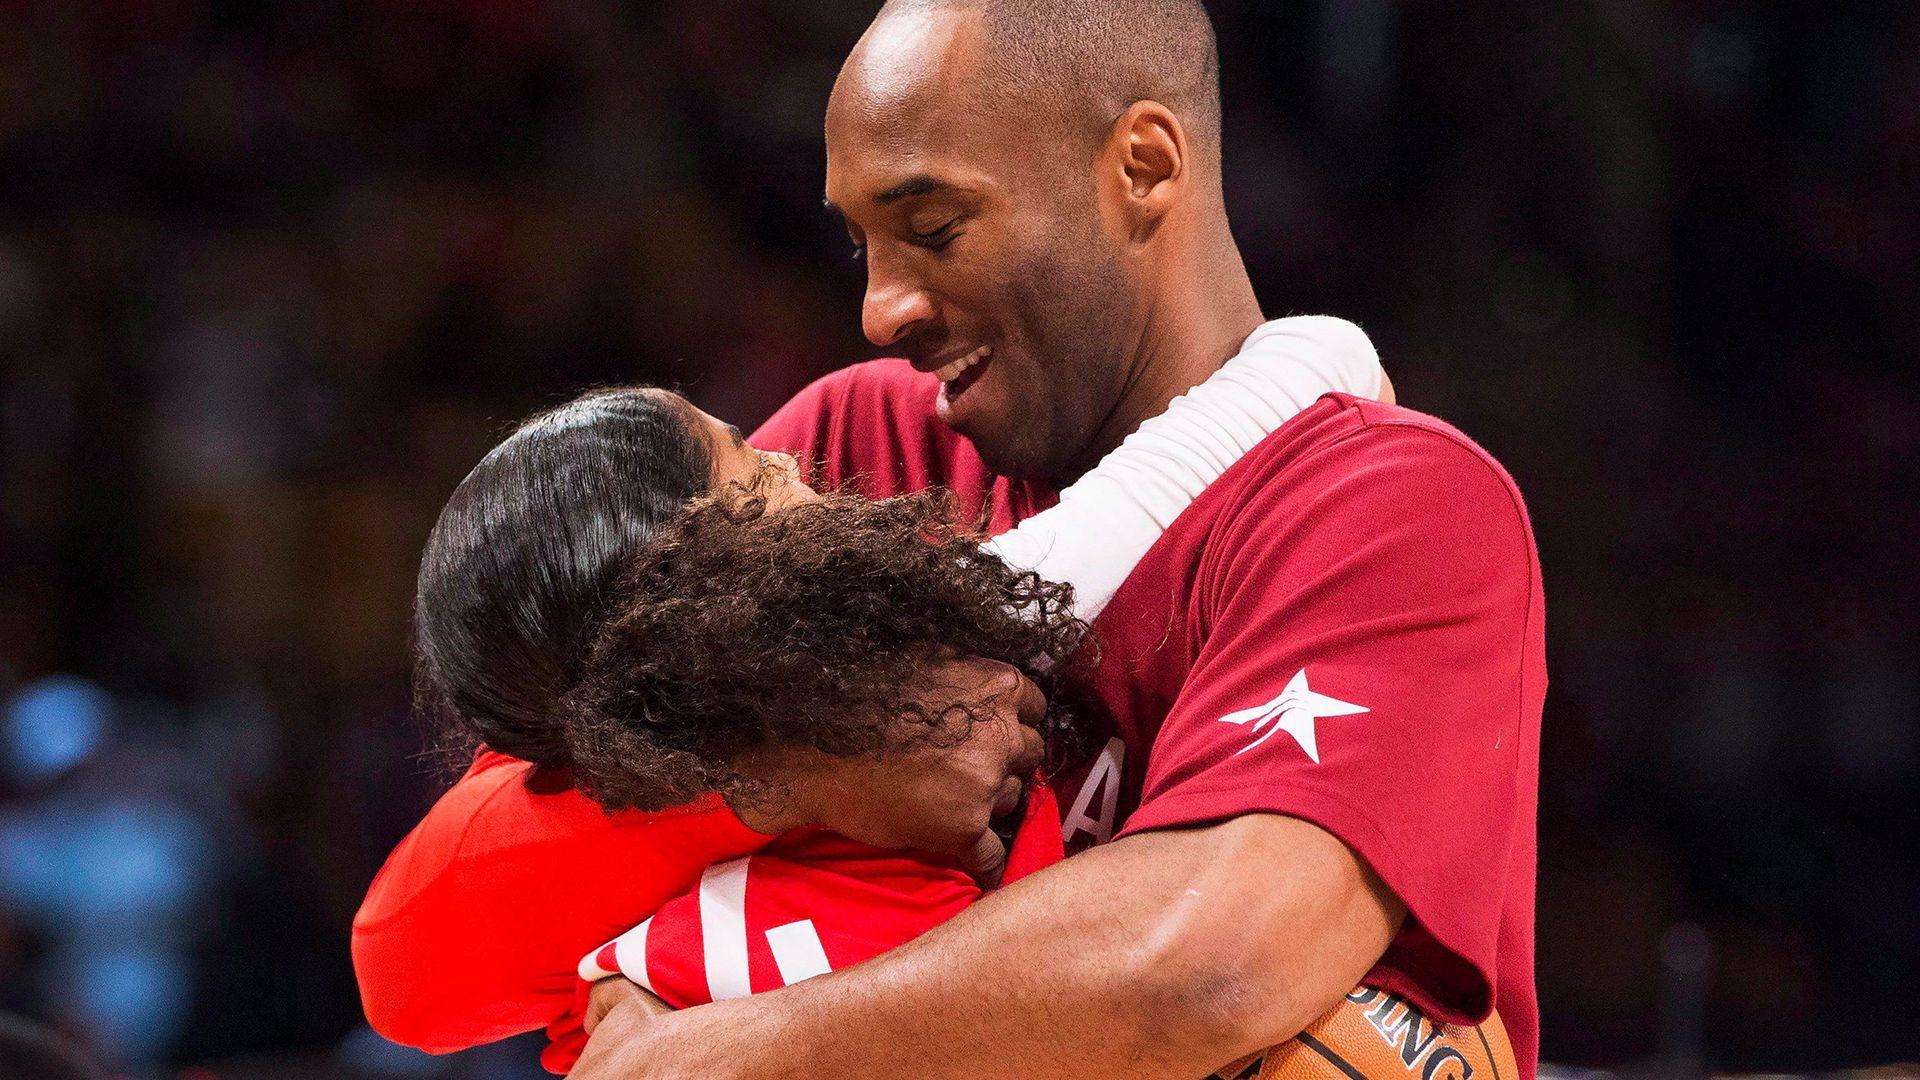 Kobe Bryant was obsessed with being a dad to his daughters